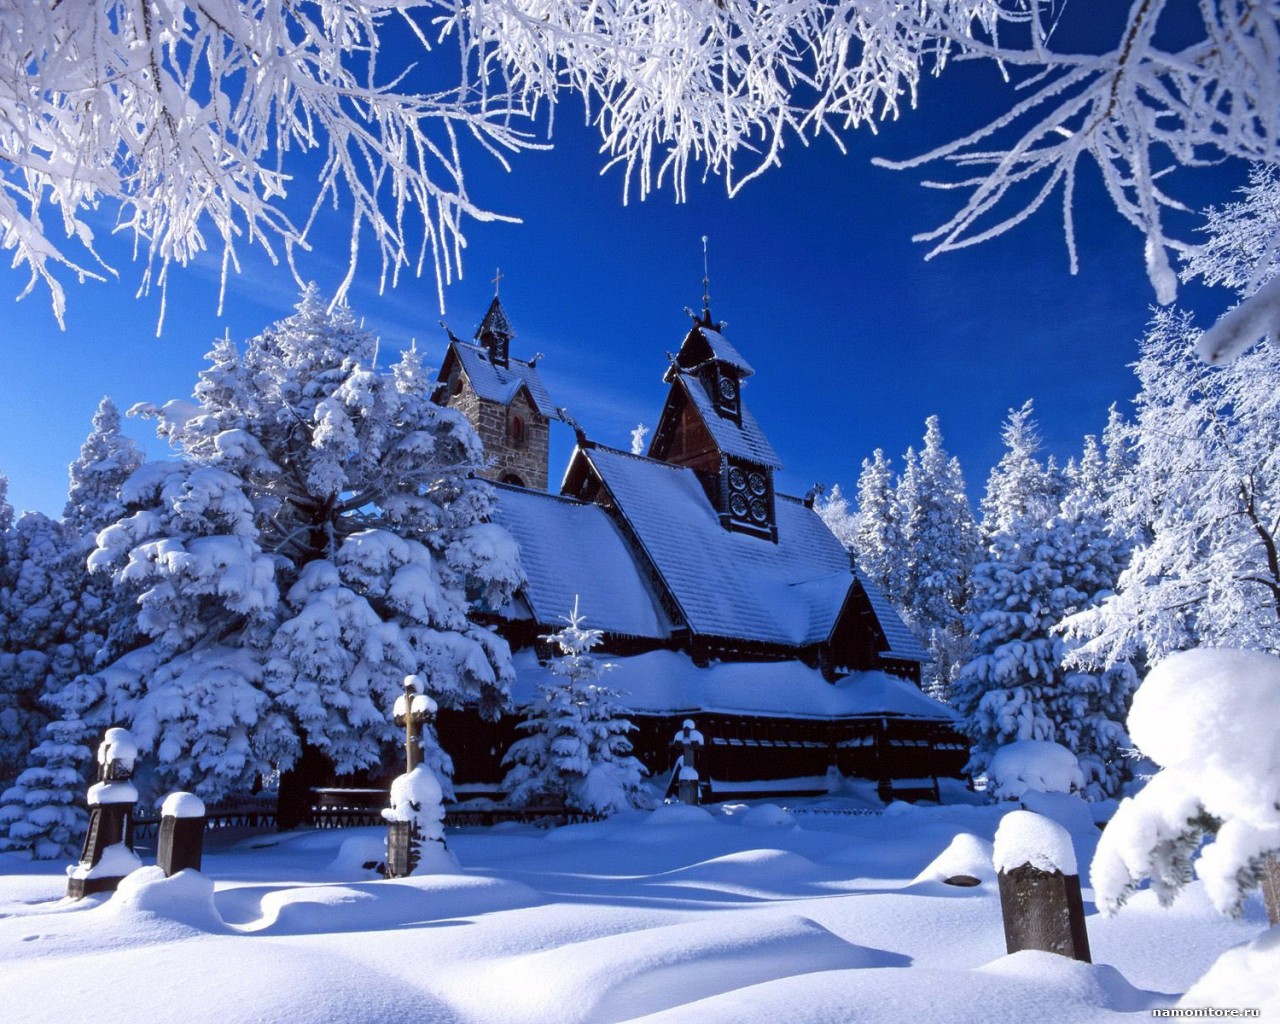 The Winter Fairy Tale Nature Wallpaper Photografies